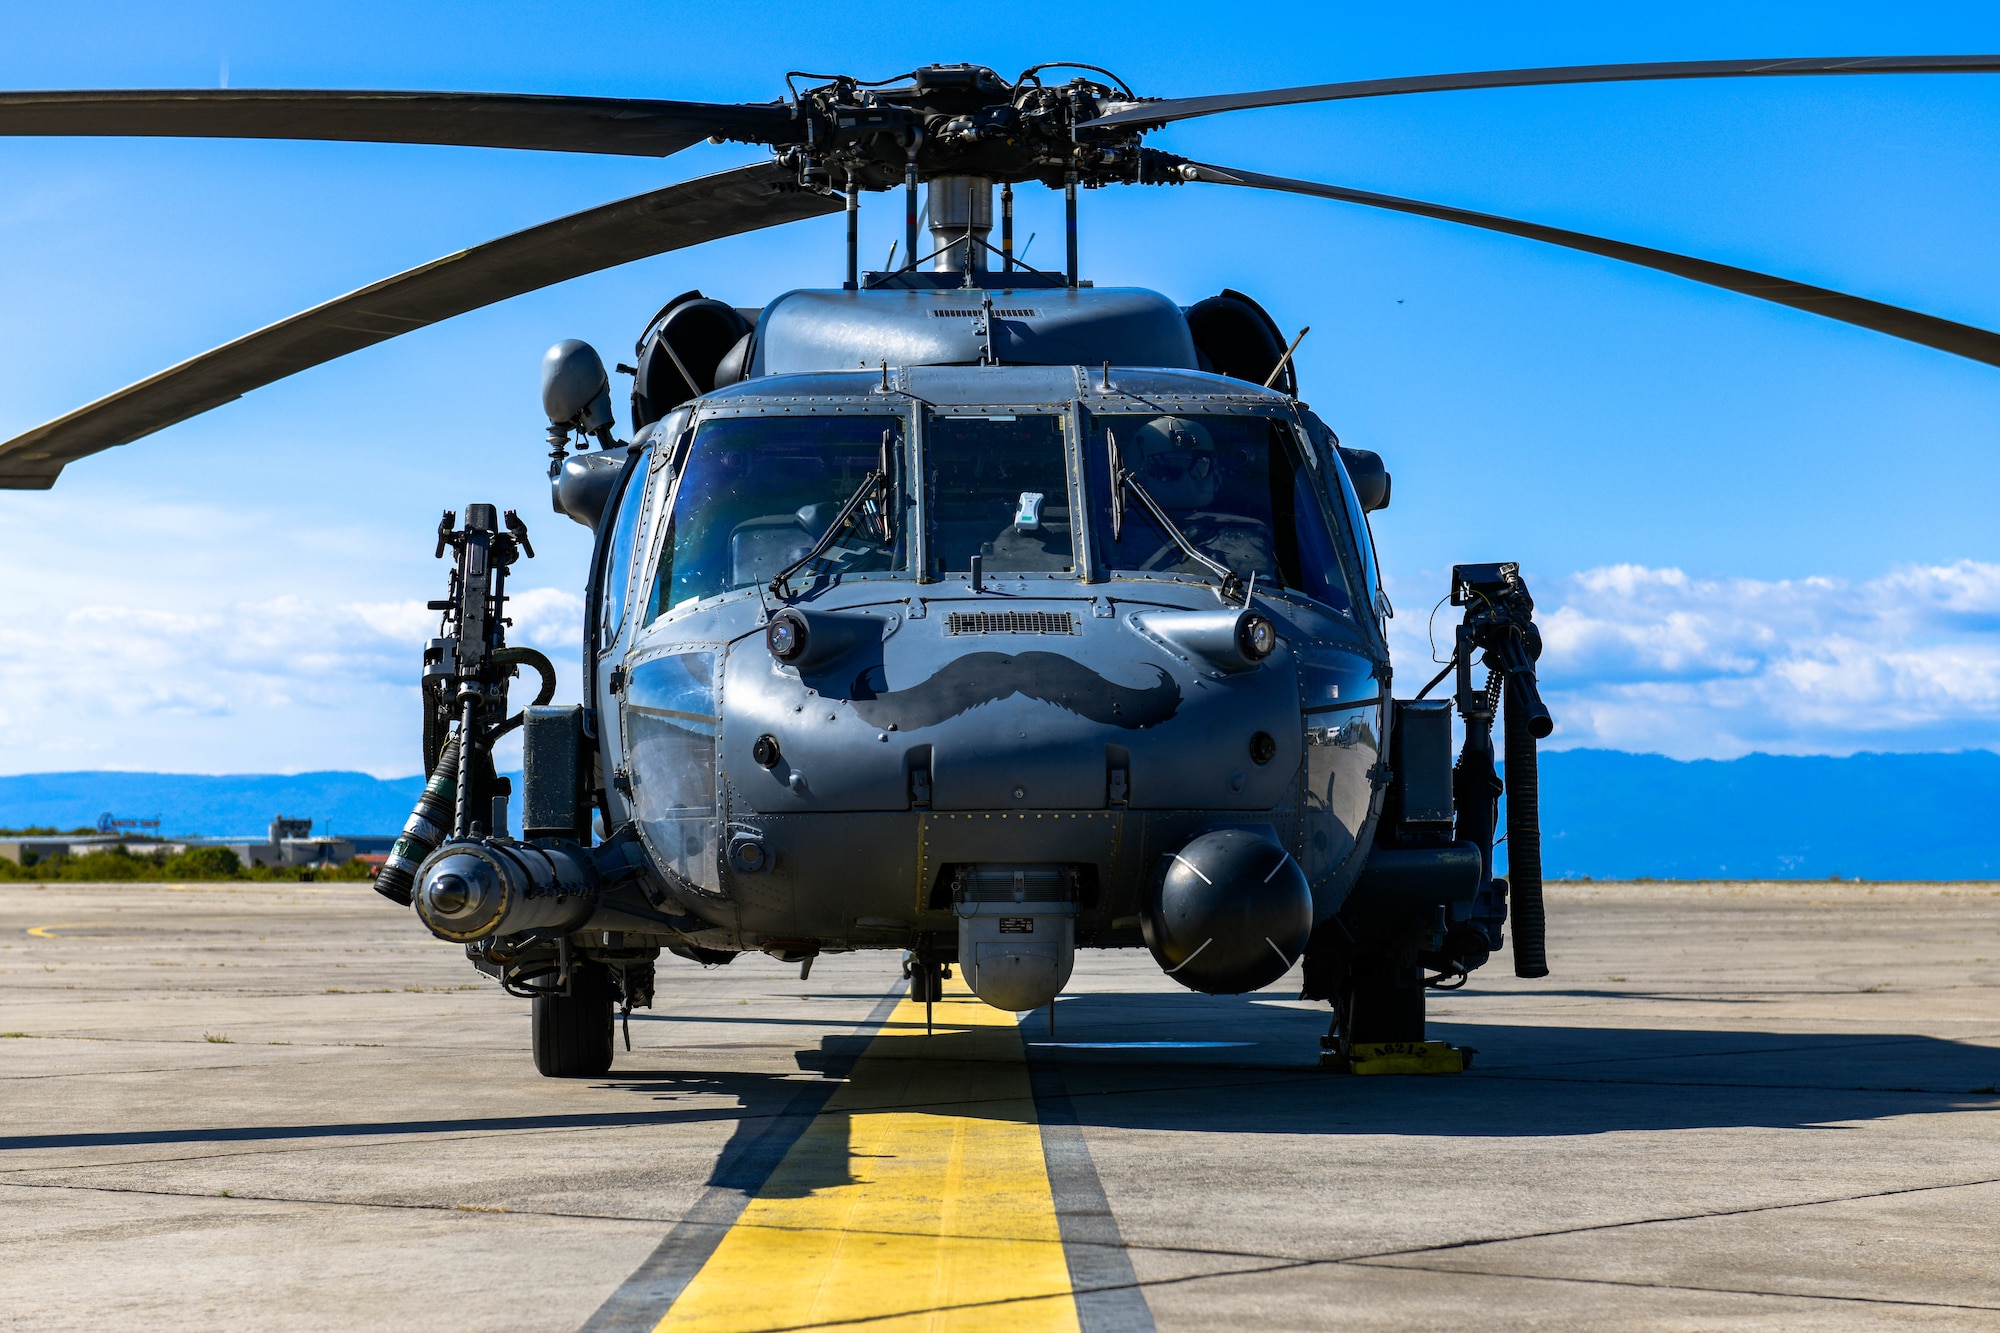 HH-60G Pave Hawk A6212, assigned to the 56th Rescue Squadron, sits on the runway after refueling at an airport in Croatia during its final flight before retirement, Sept. 23, 2021. A6212 is scheduled to be stripped of required components then mounted in front of the 56th Operations Rescue Squadron, building 7300. (U.S. Air Force photo by Senior Airman Brooke Moeder)